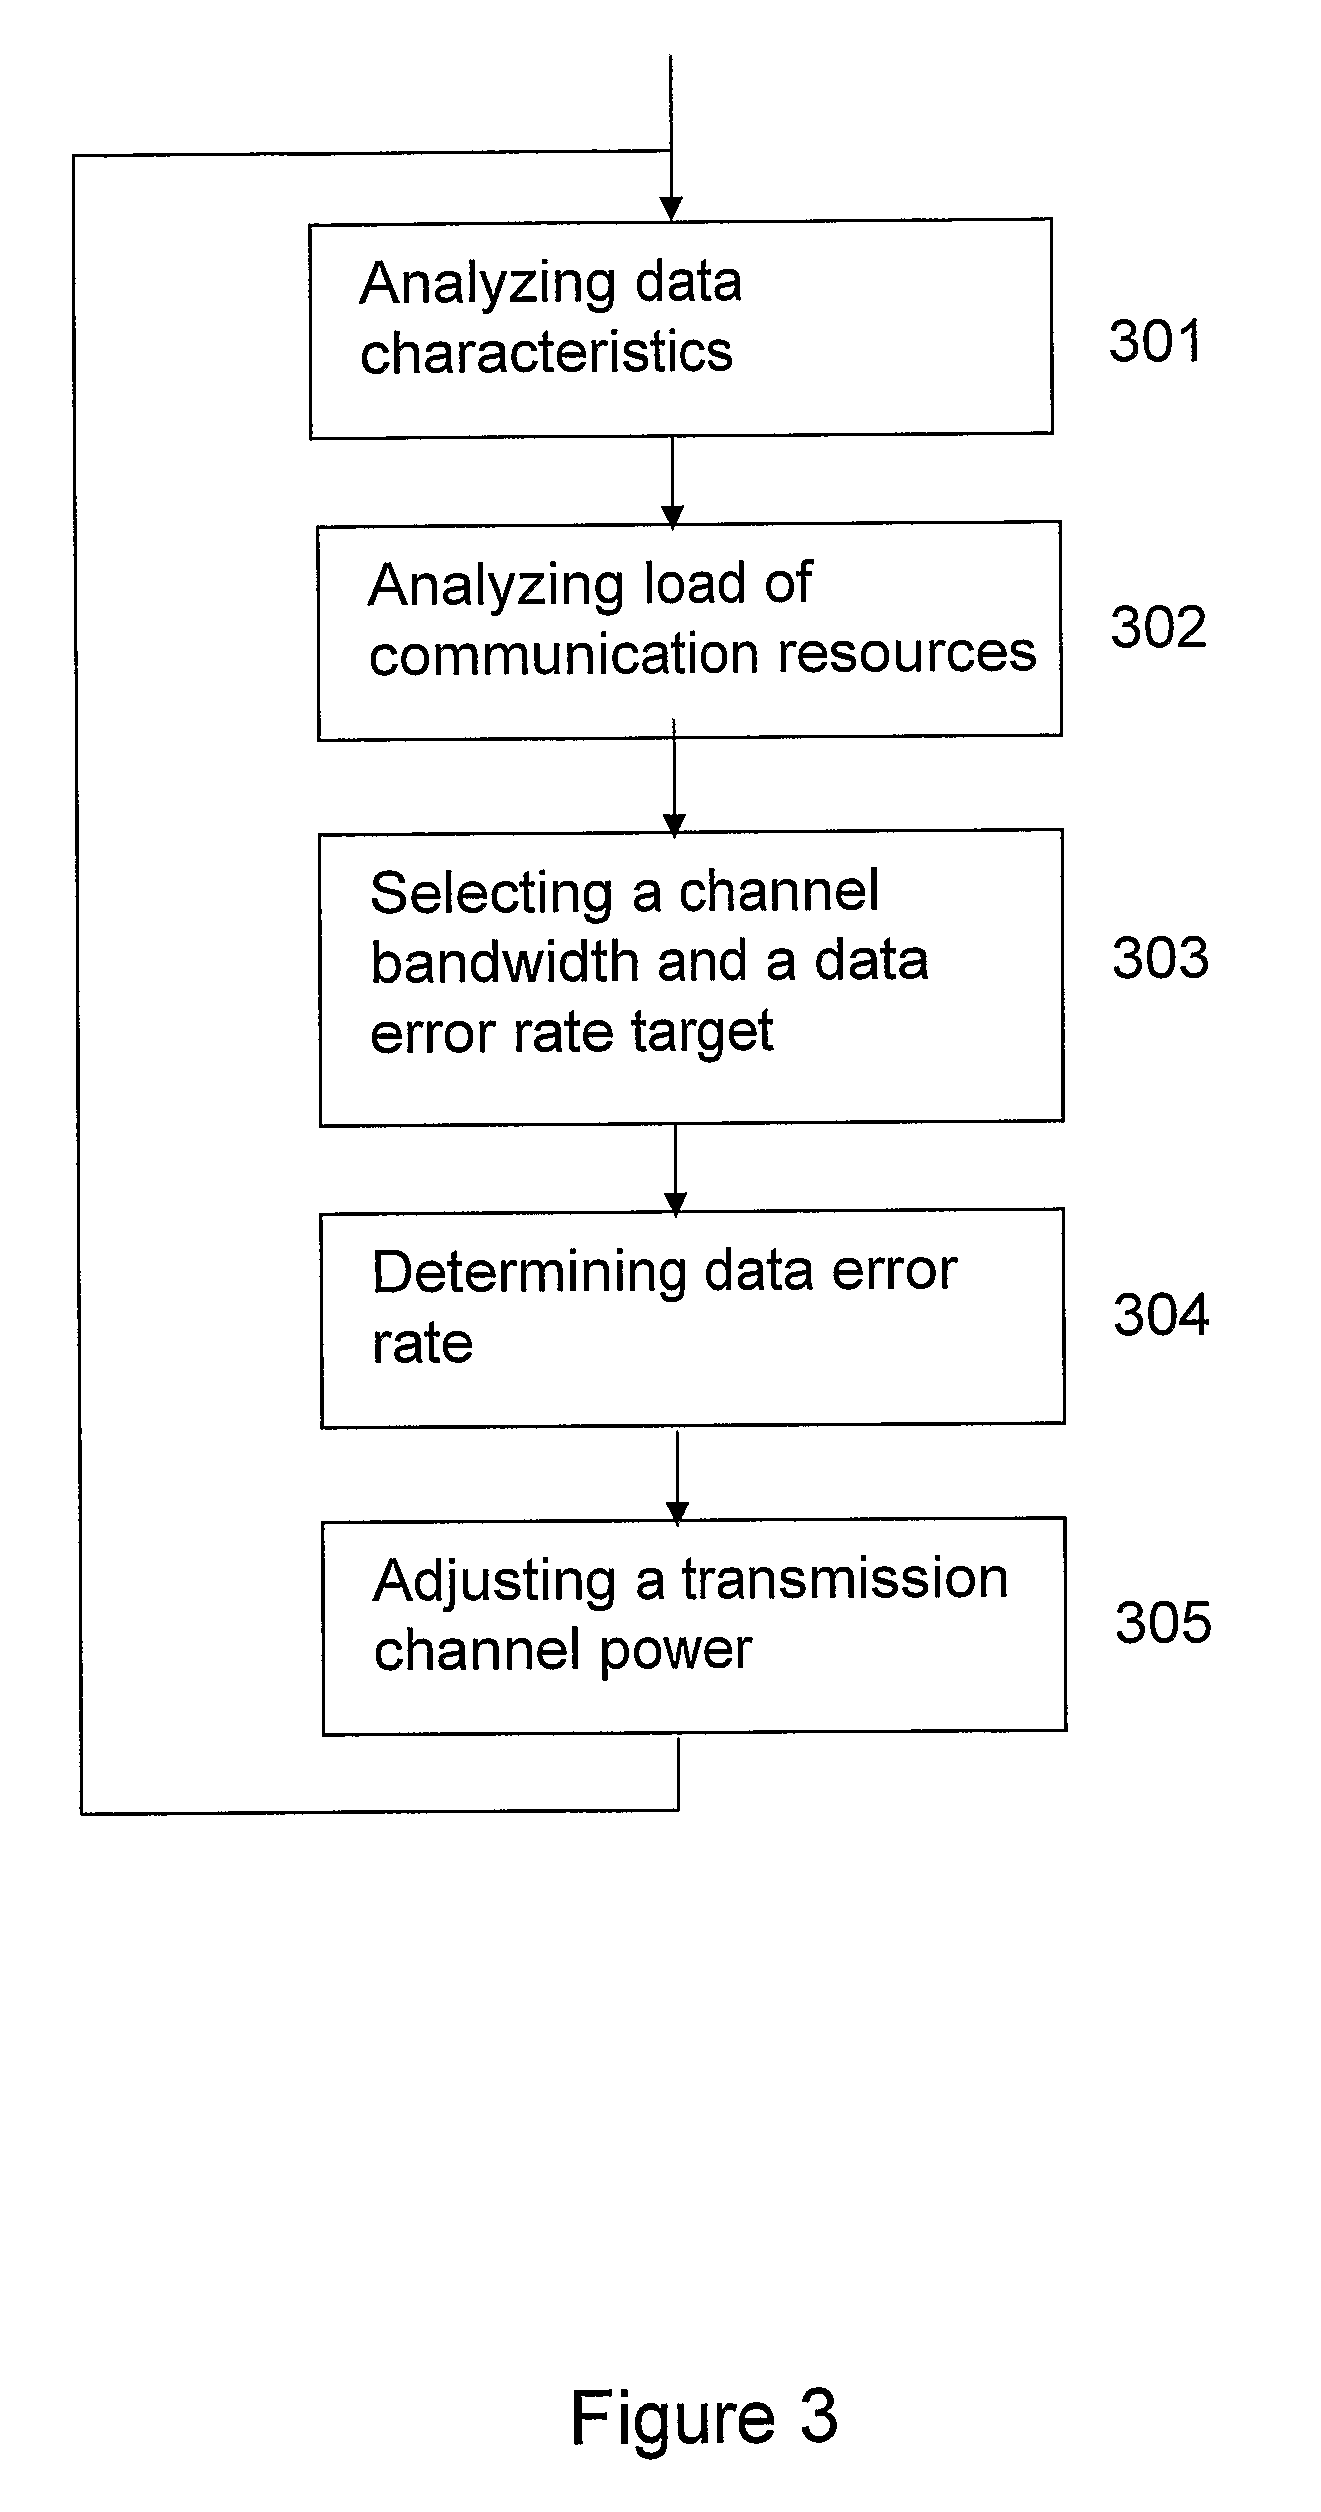 Selecting Channel Bandwidth and Data Error Target Dynamically Based On a Determined Transmission Need